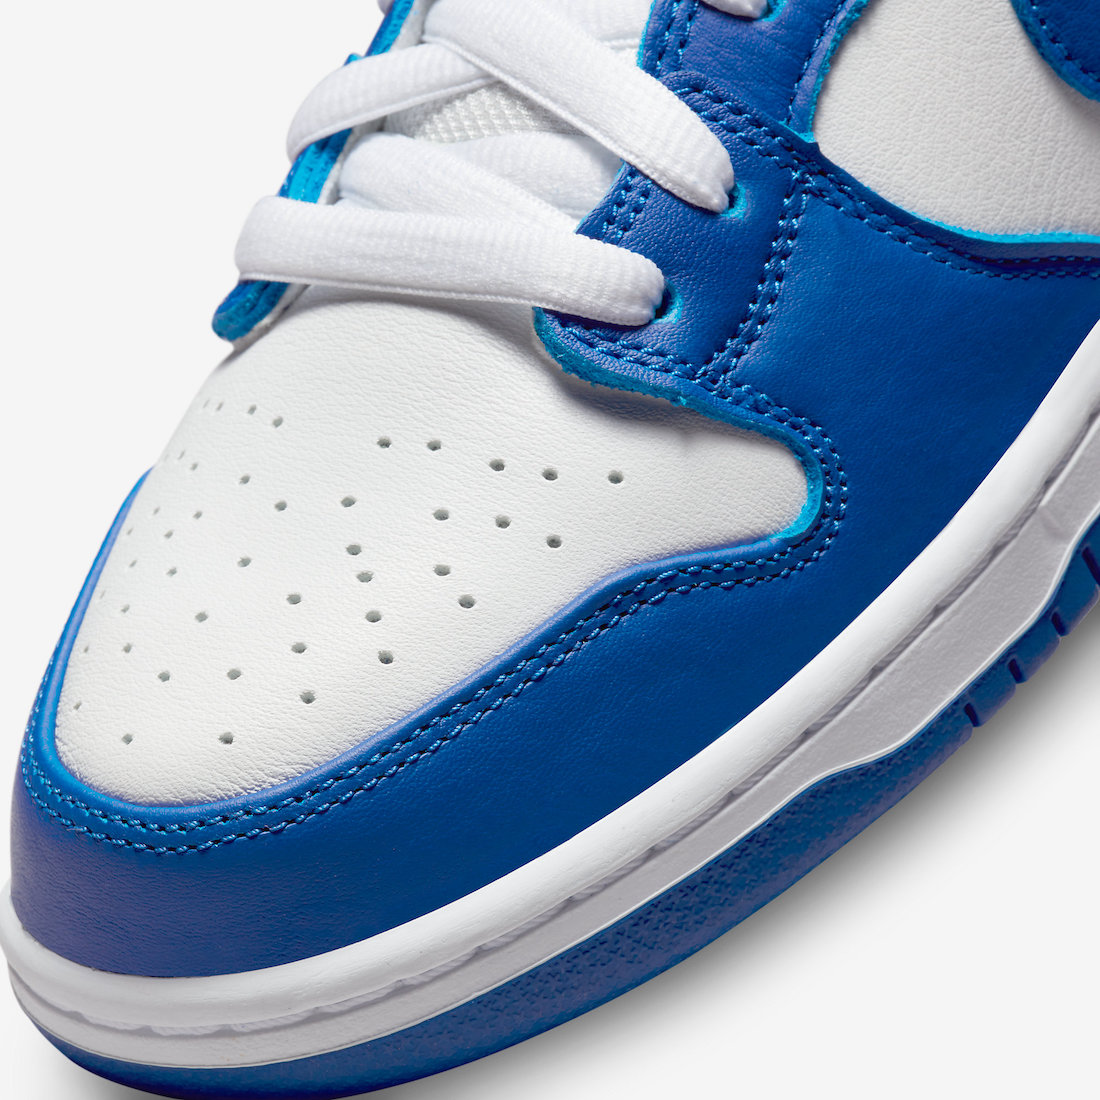 Nike SB Dunk High Pro ISO Kentucky Blue White DH7149-400 Release Date